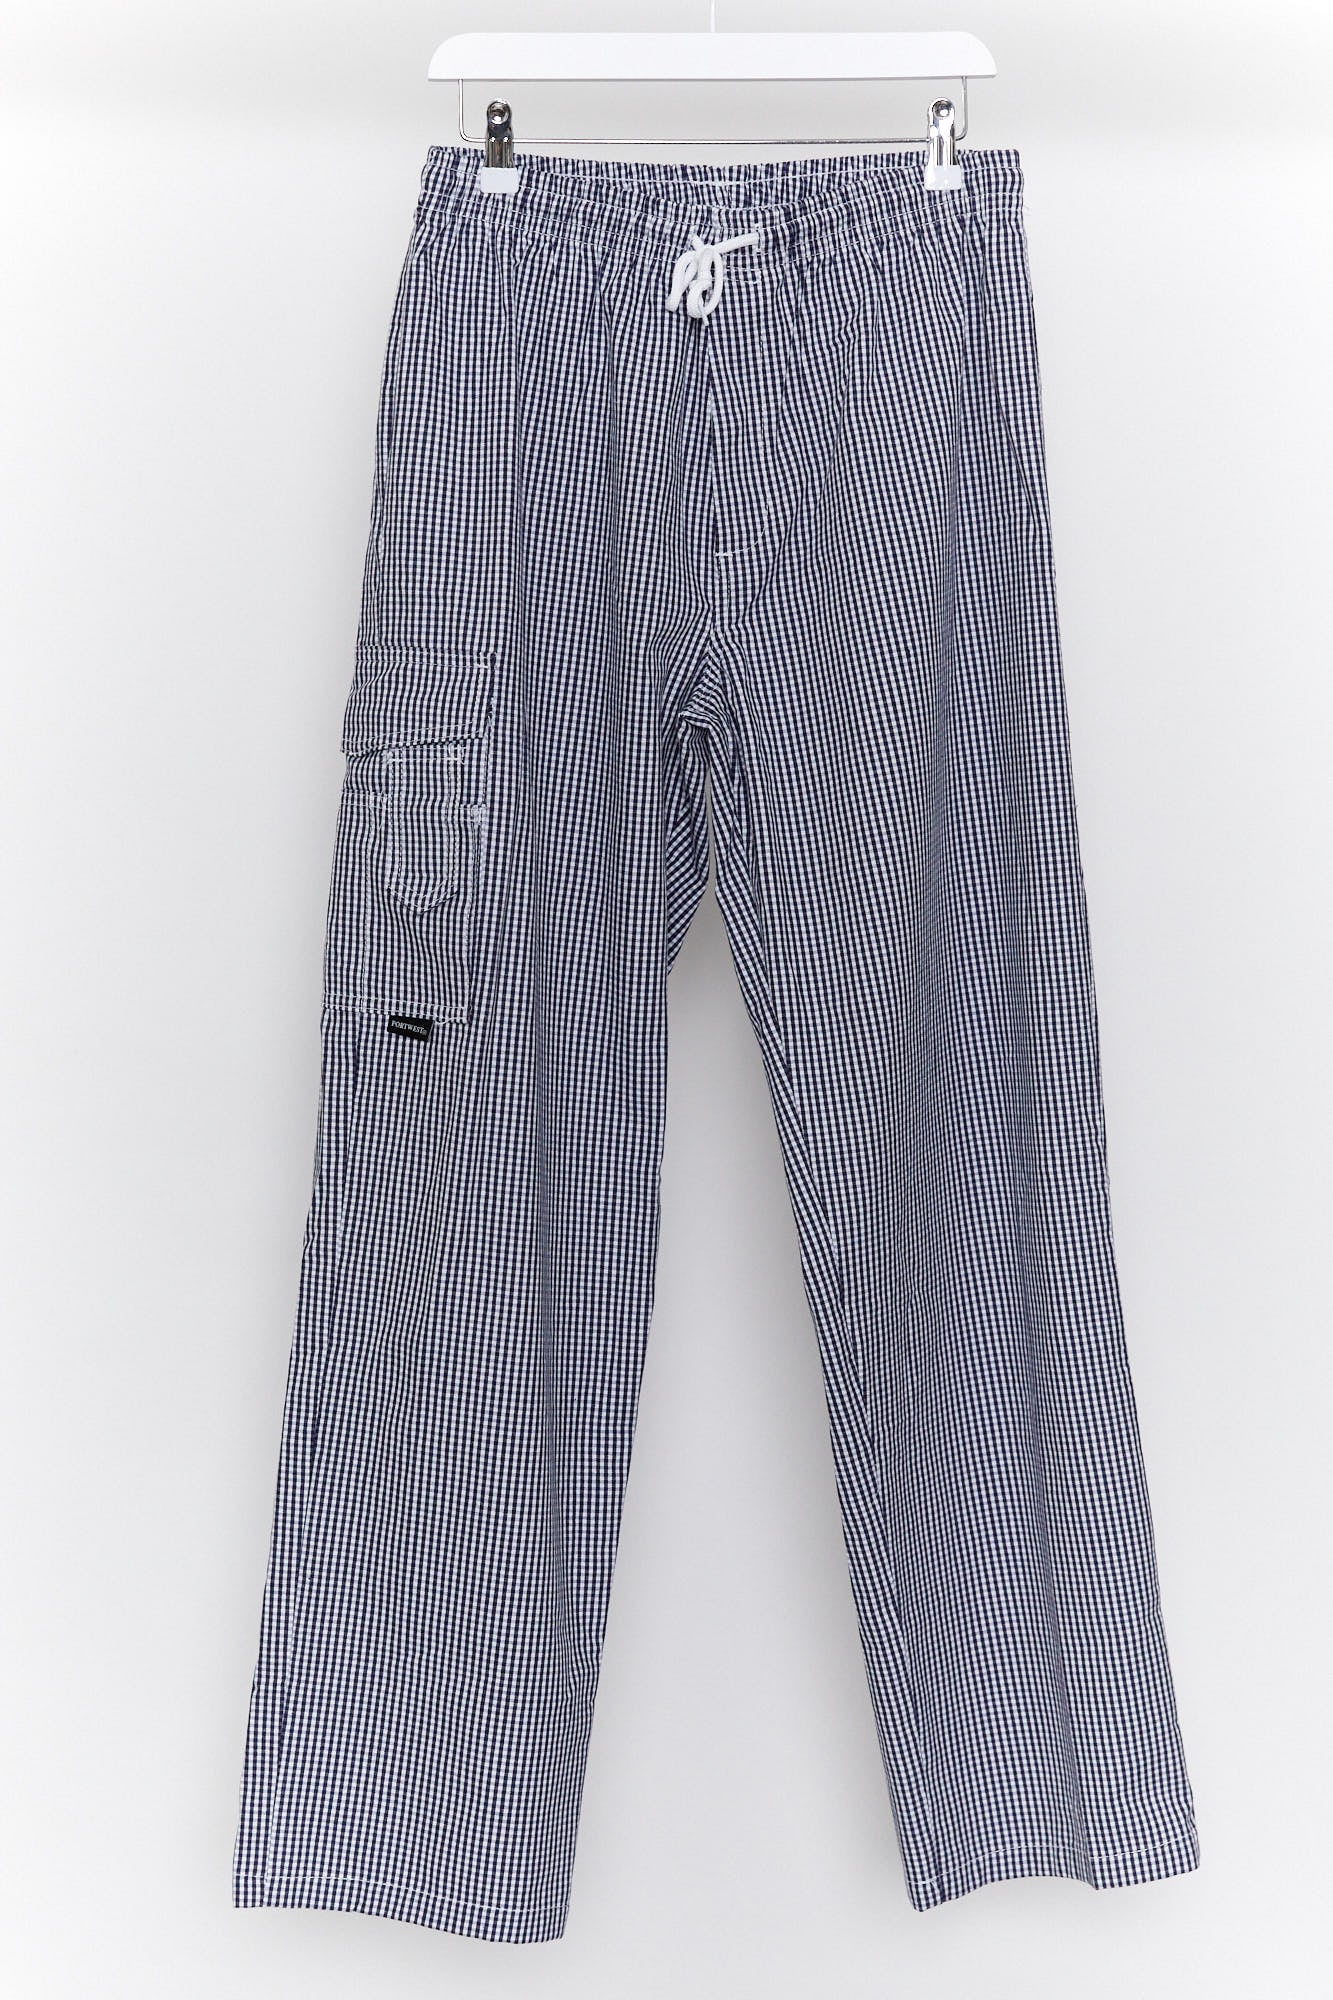 Blue Check Chef Trousers size Medium